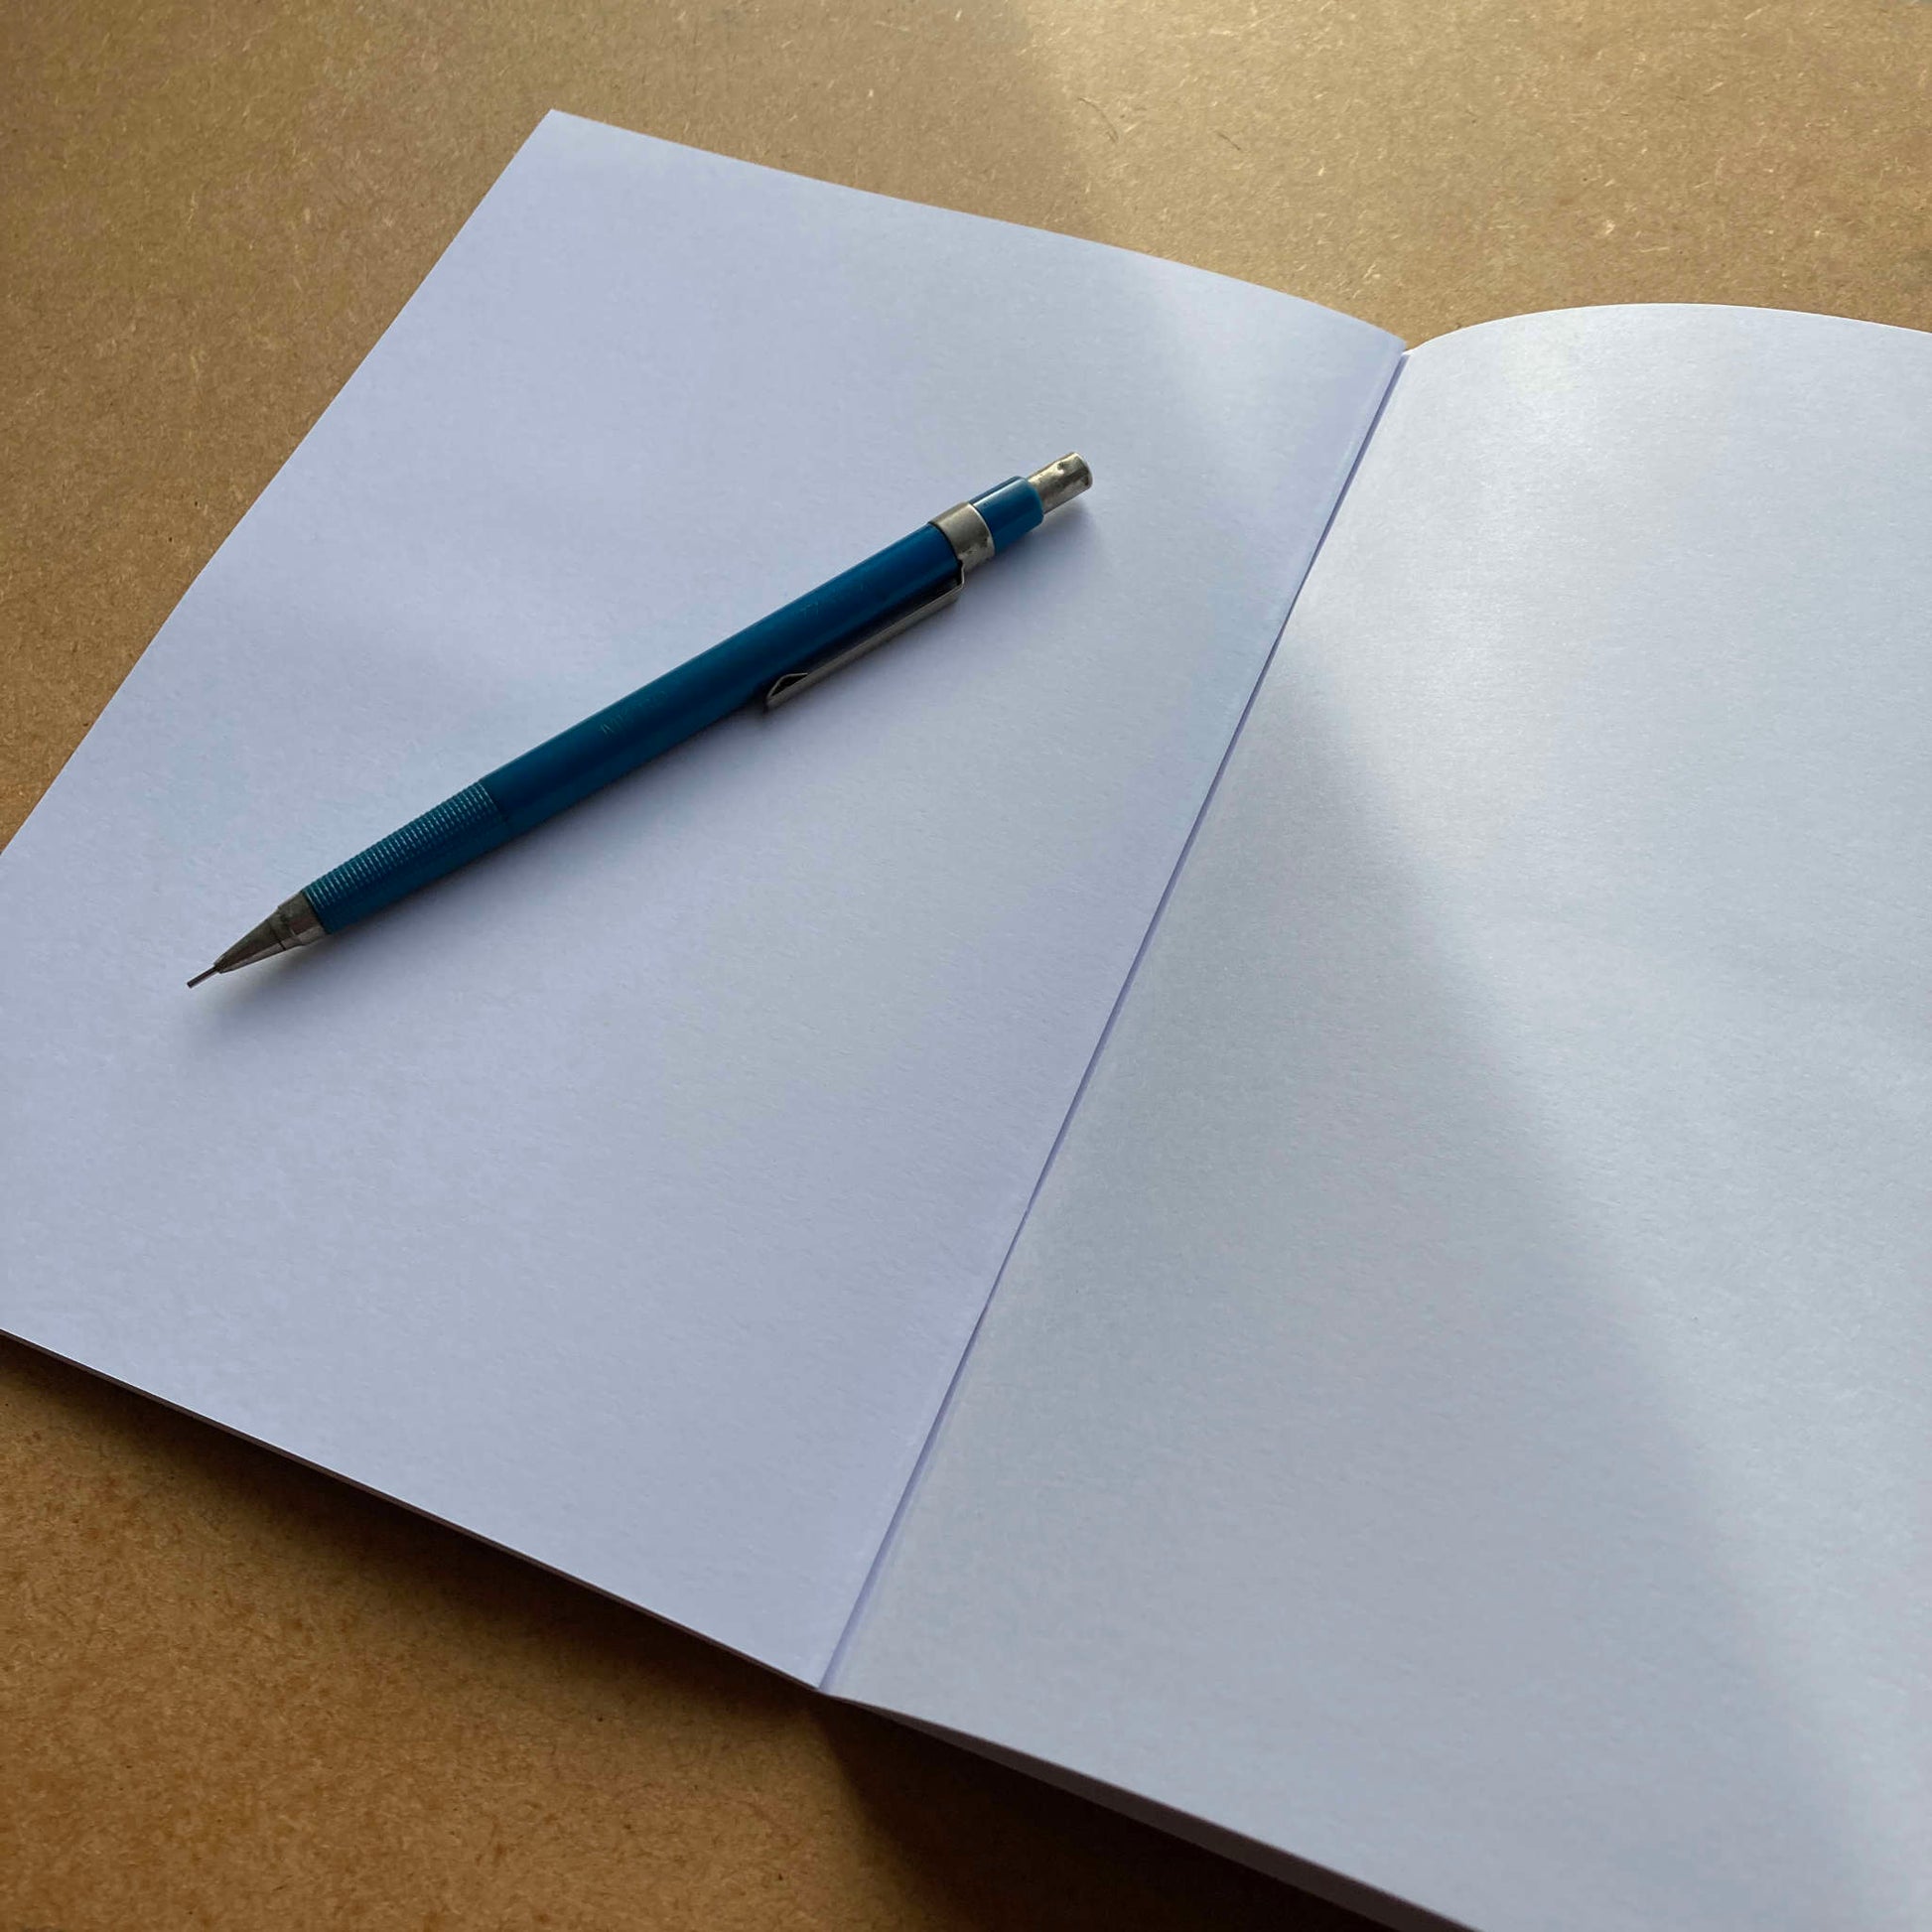 Inside view of the blank notebook.